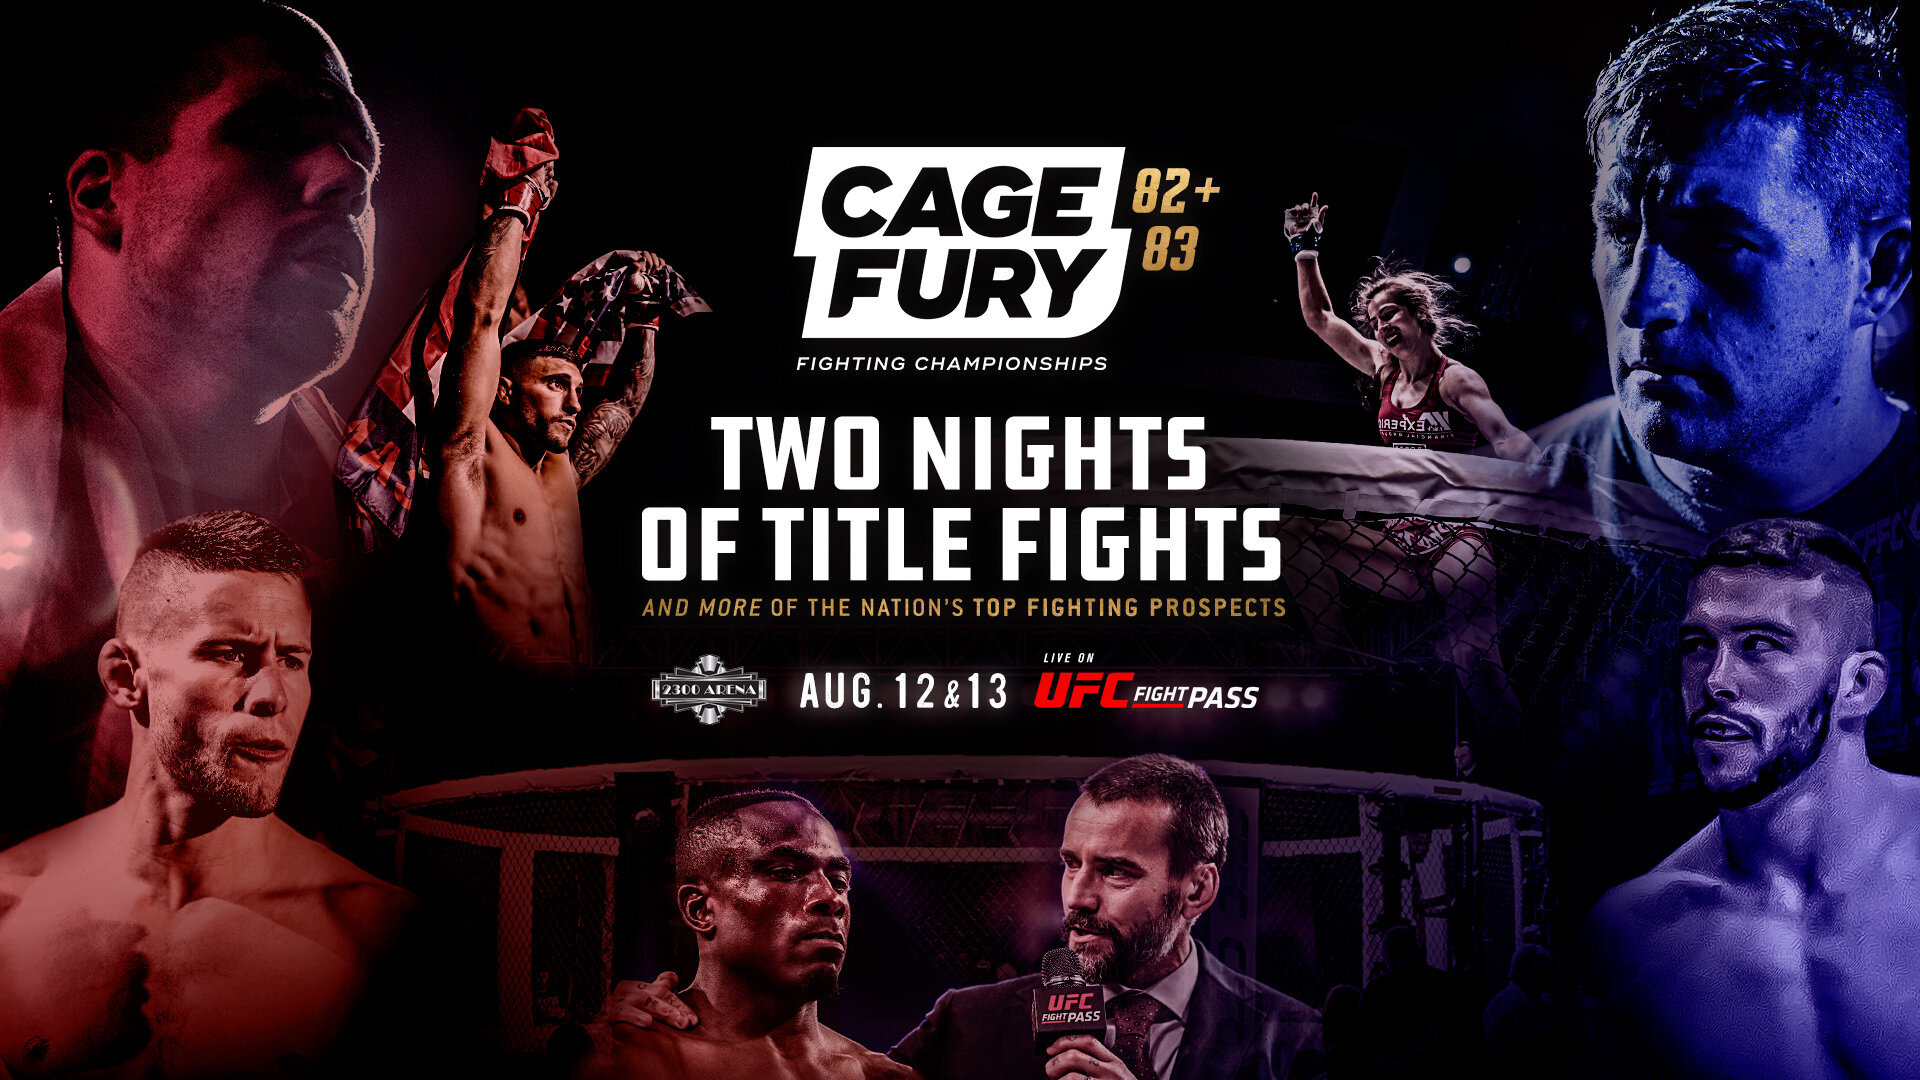 Cage Fury Fighting Championships returns in August with back-to-back blockbusters — Cage Fury Fighting Championships